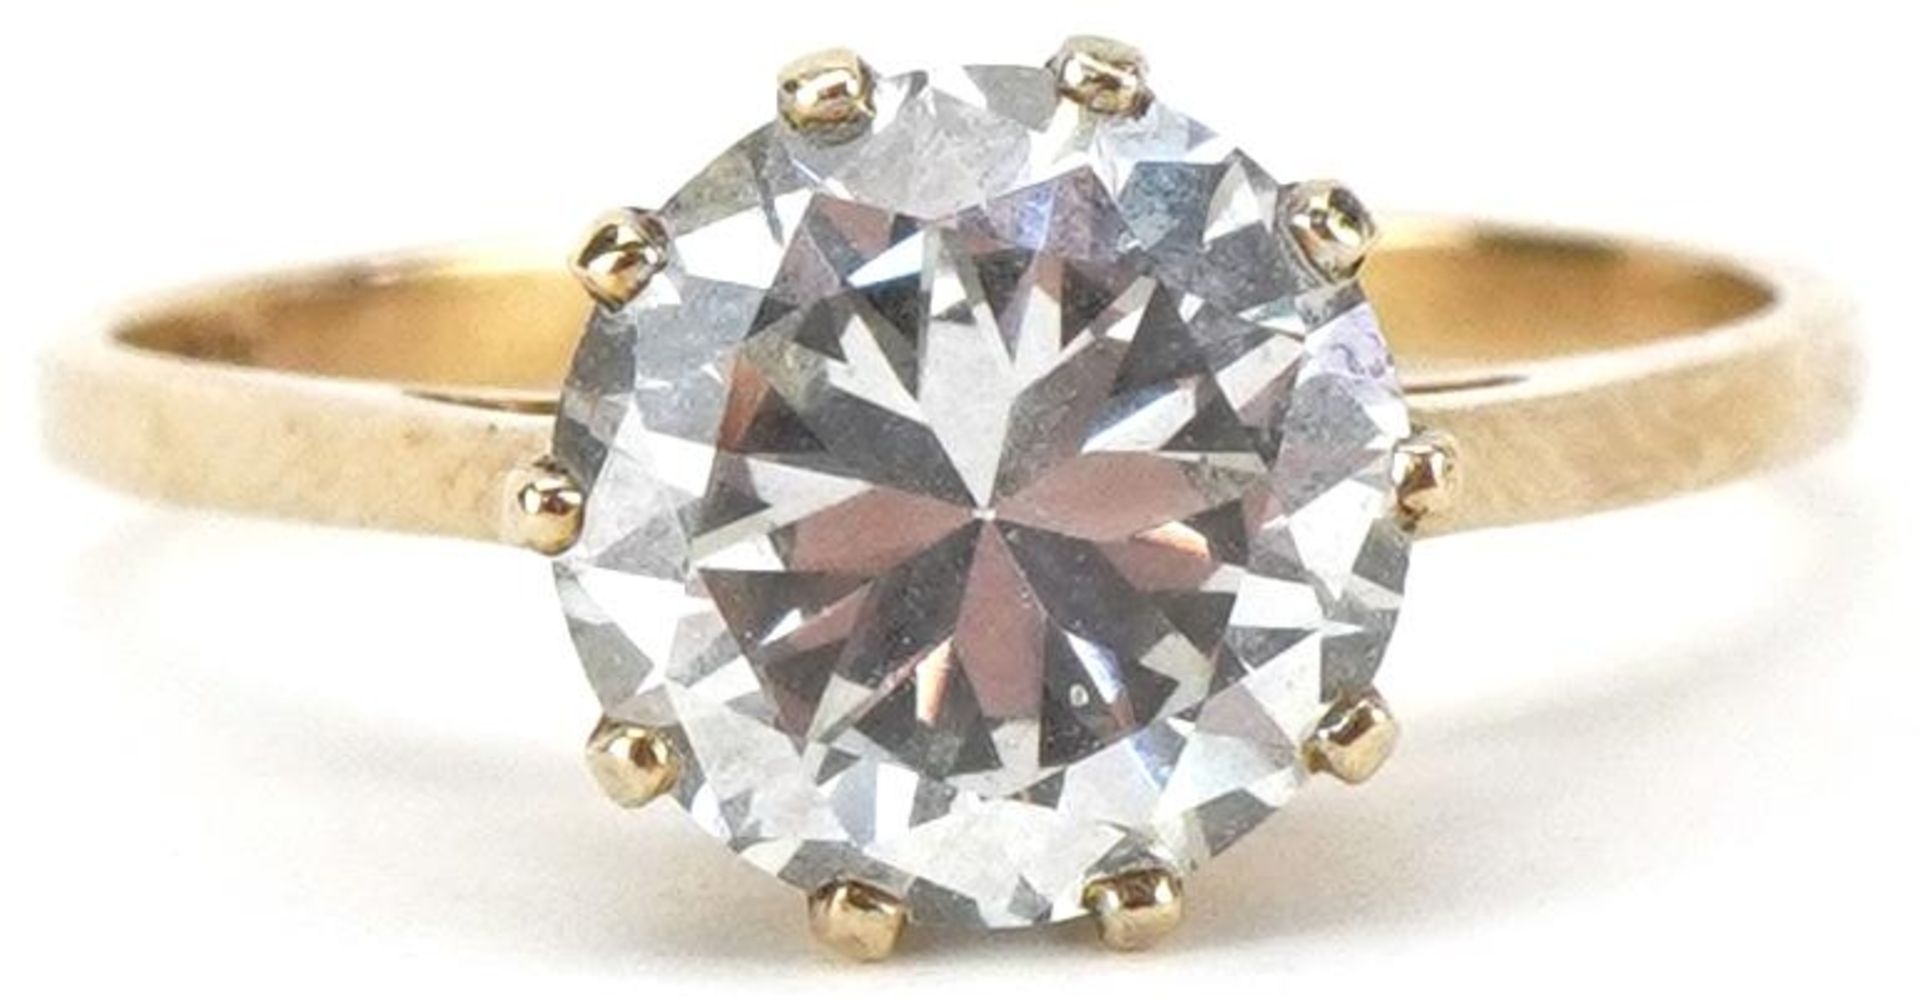 9ct gold cubic zirconia solitaire ring, the cubic zirconia approximately 8.10mm in diameter x 5.